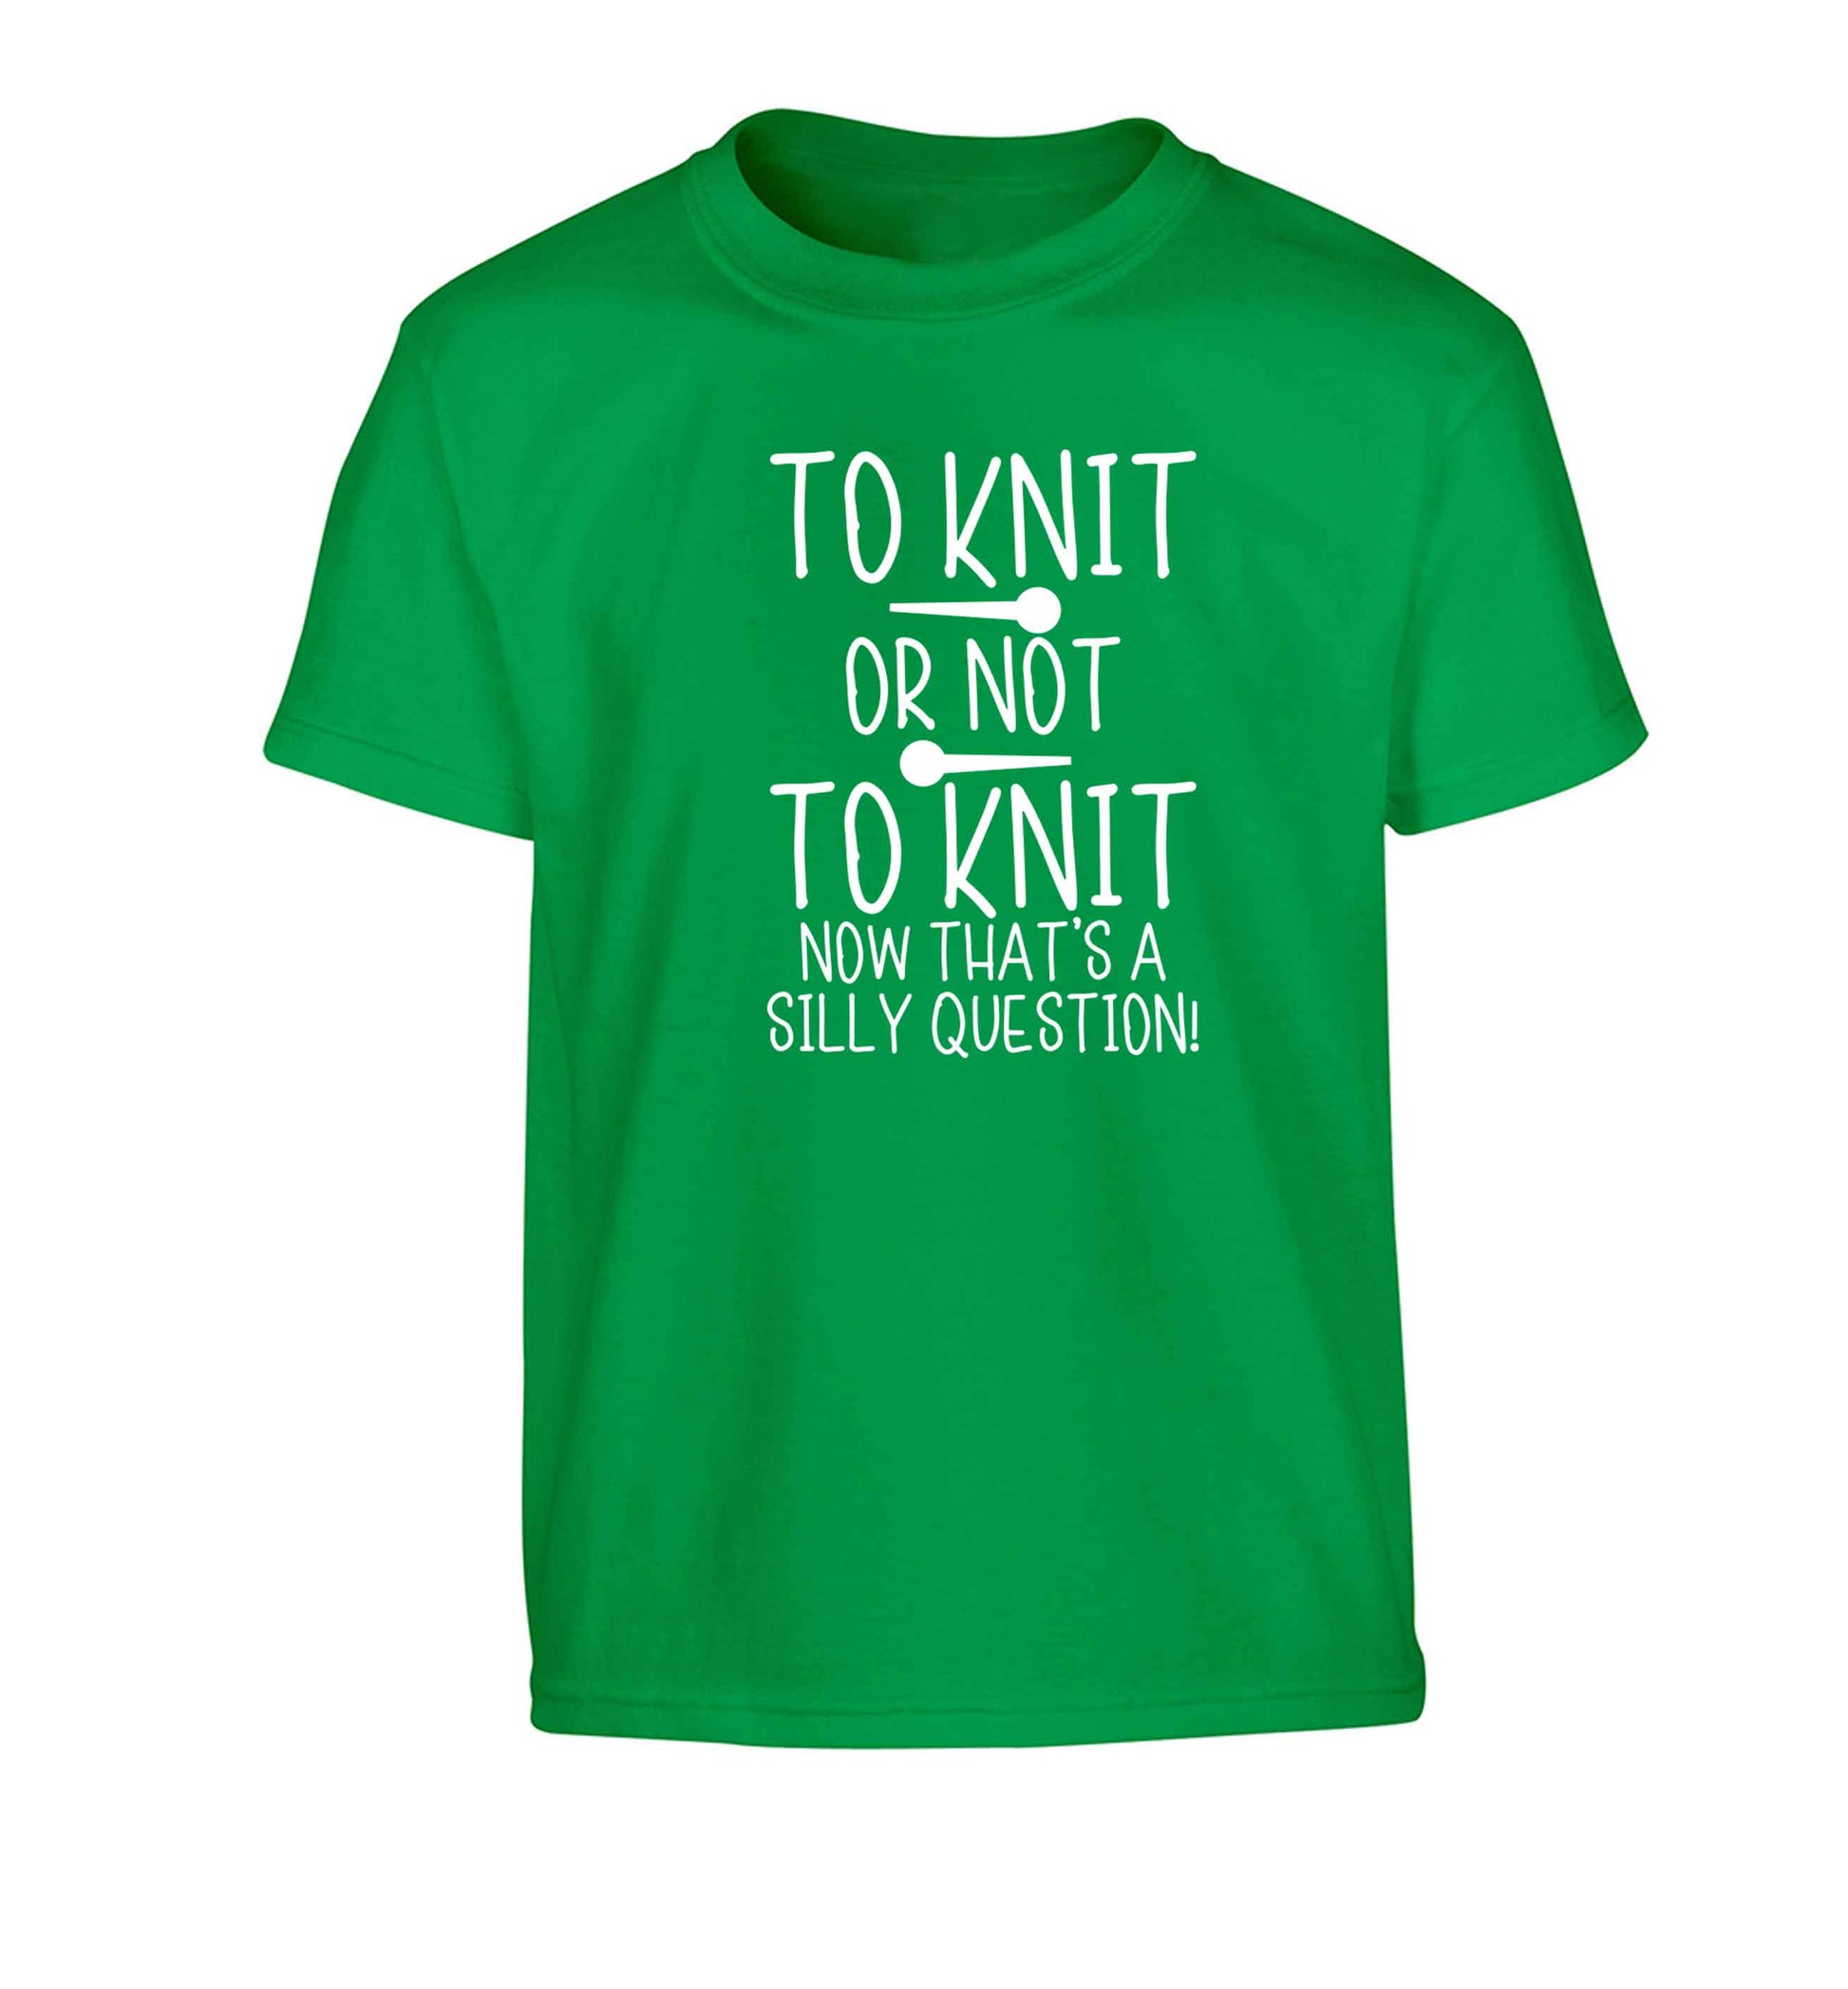 To knit or not to knit now that's a silly question Children's green Tshirt 12-13 Years